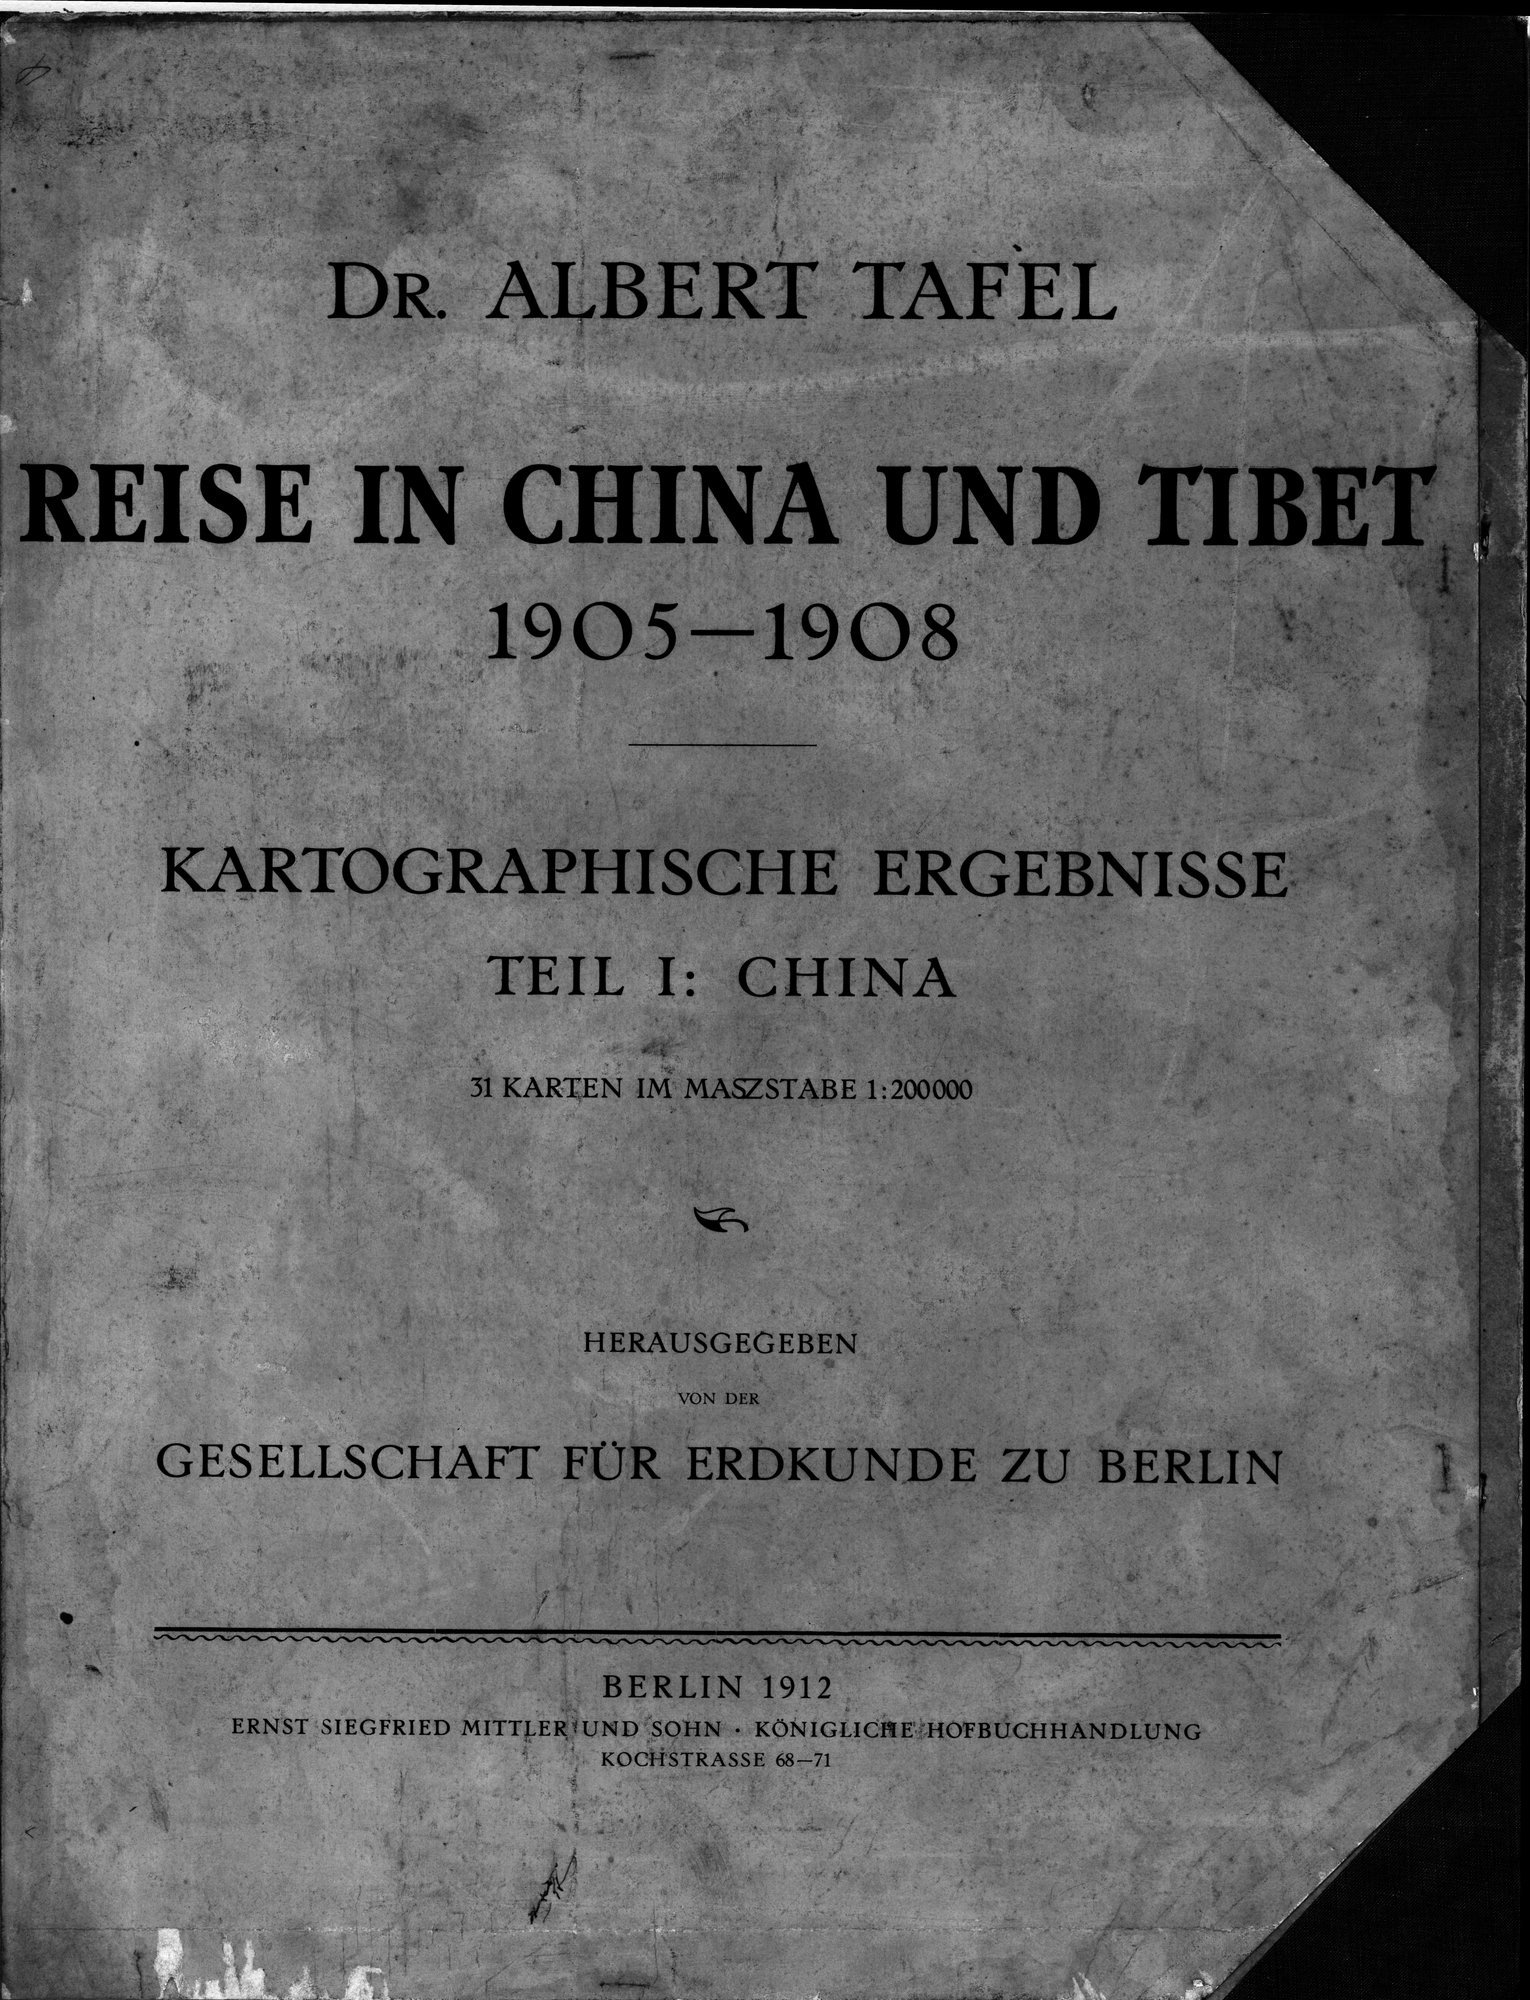 Reise in China und Tibet, 1905-1908 : vol.1 / Page 1 (Grayscale High Resolution Image)